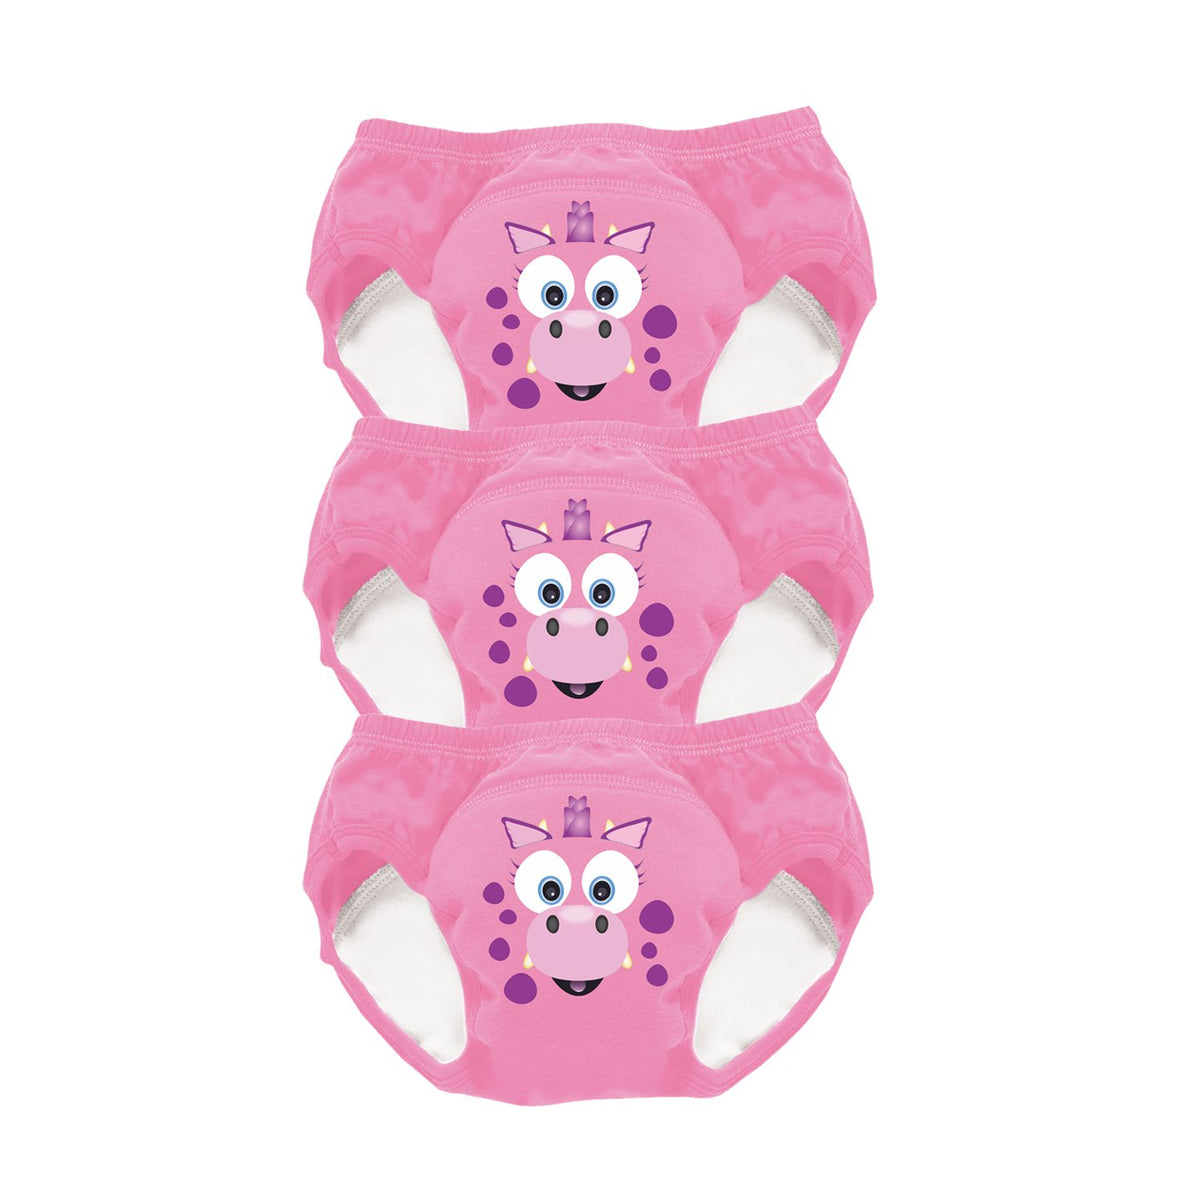  Potty Training Underwear For Girls And Boys, 18-24 Months, 3  Pack